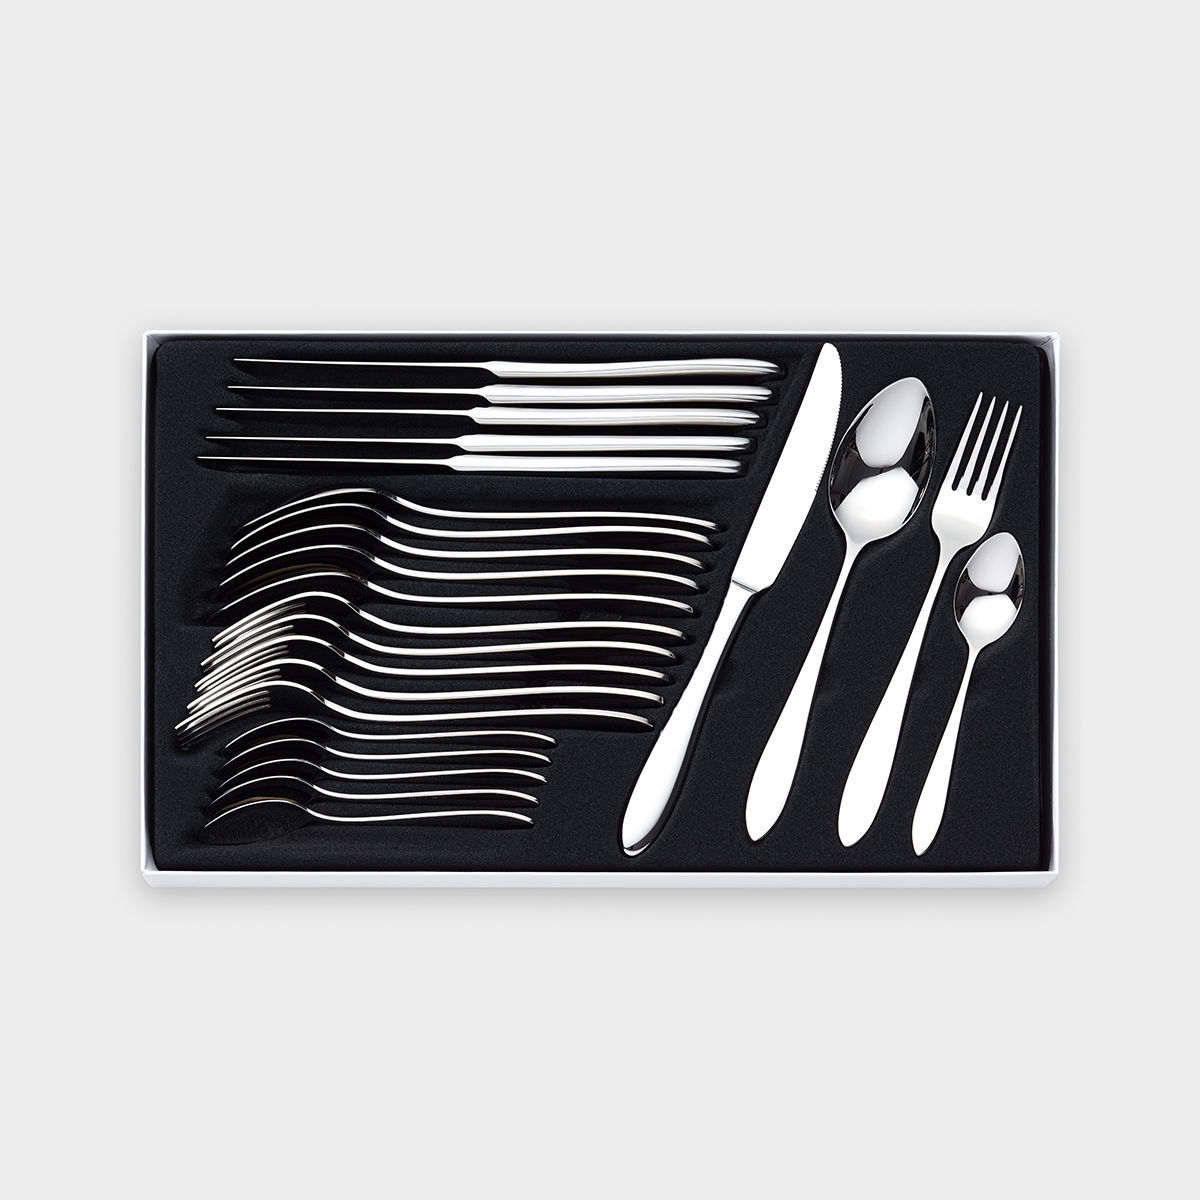 Fjord cutlery set 16 pieces product image